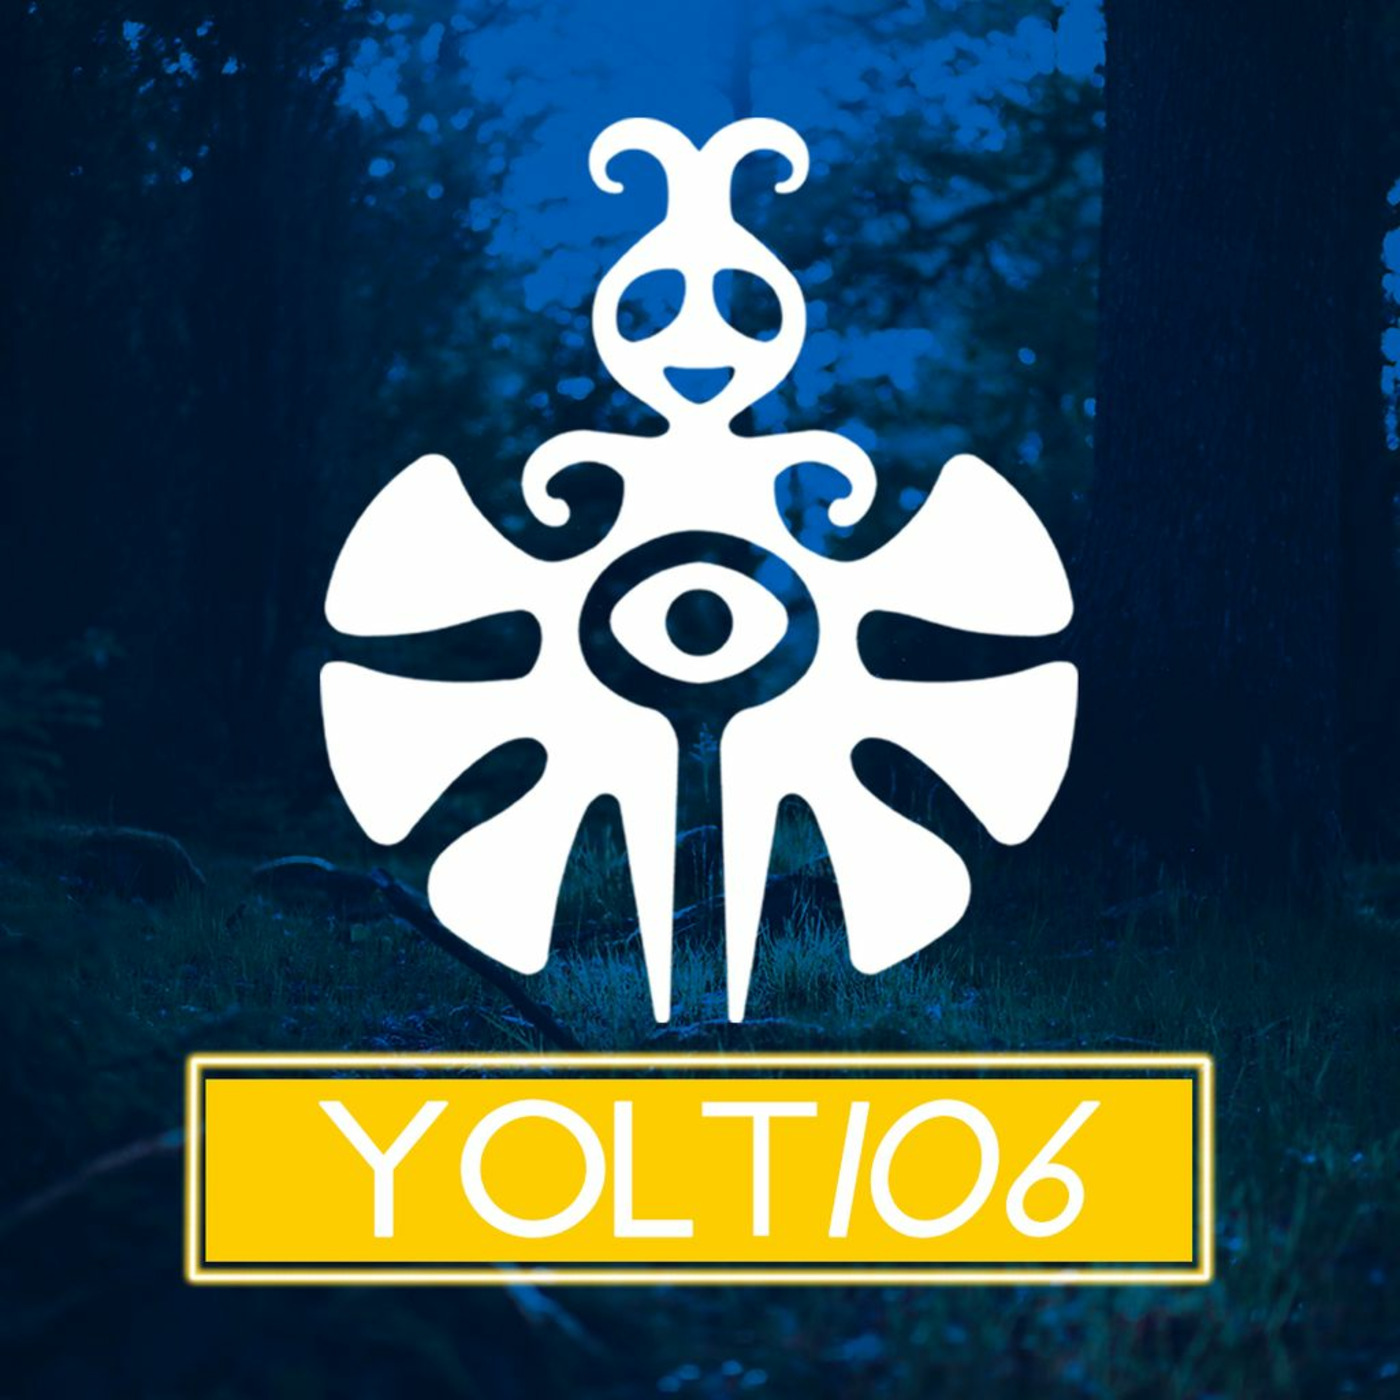 You Only Live Trance Episode 106 (#YOLT106) - Ness